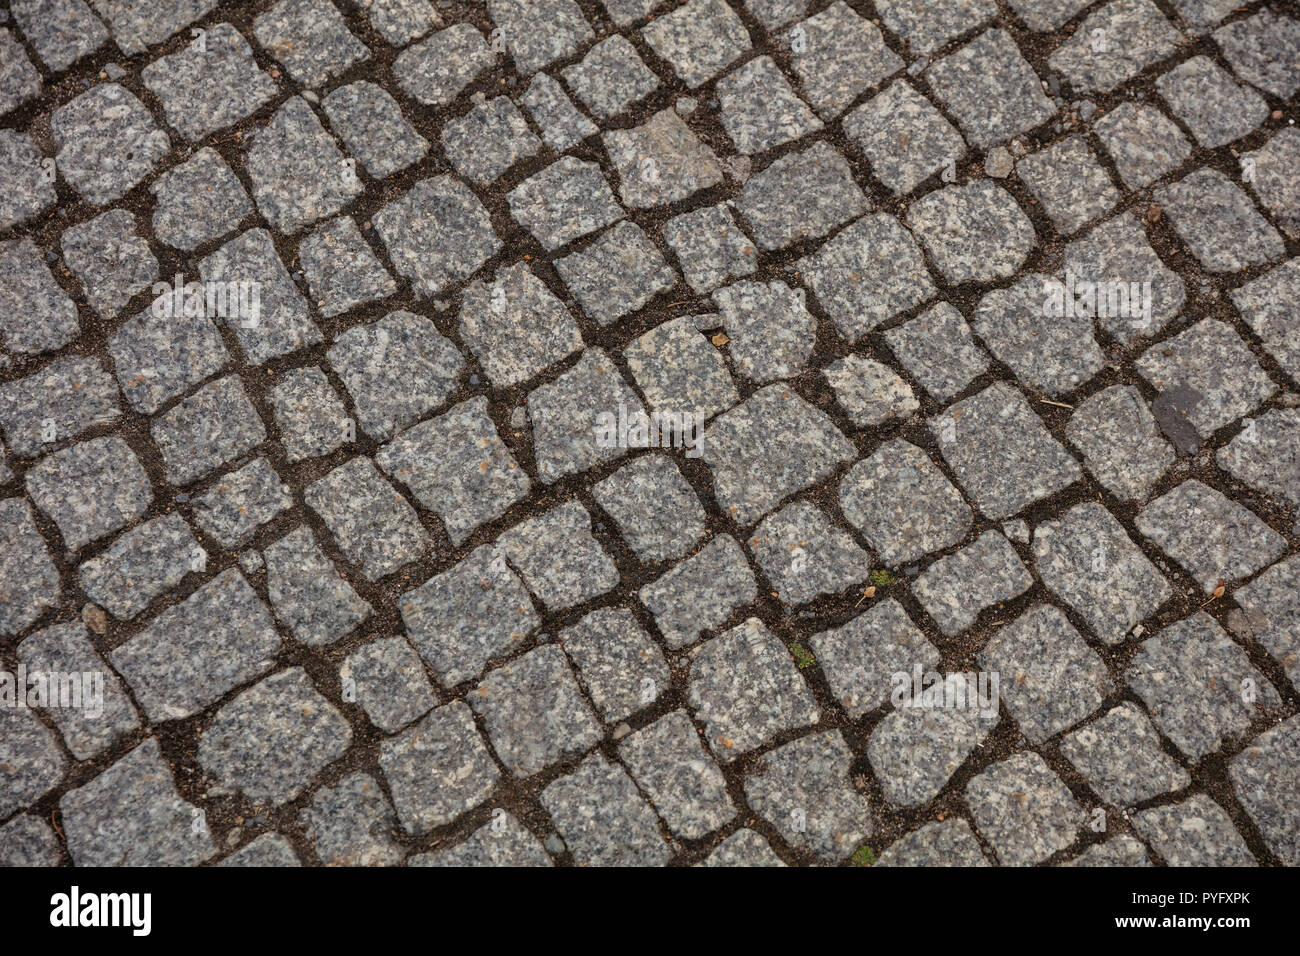 Top view of cobblestone street, texture, background. Stock Photo